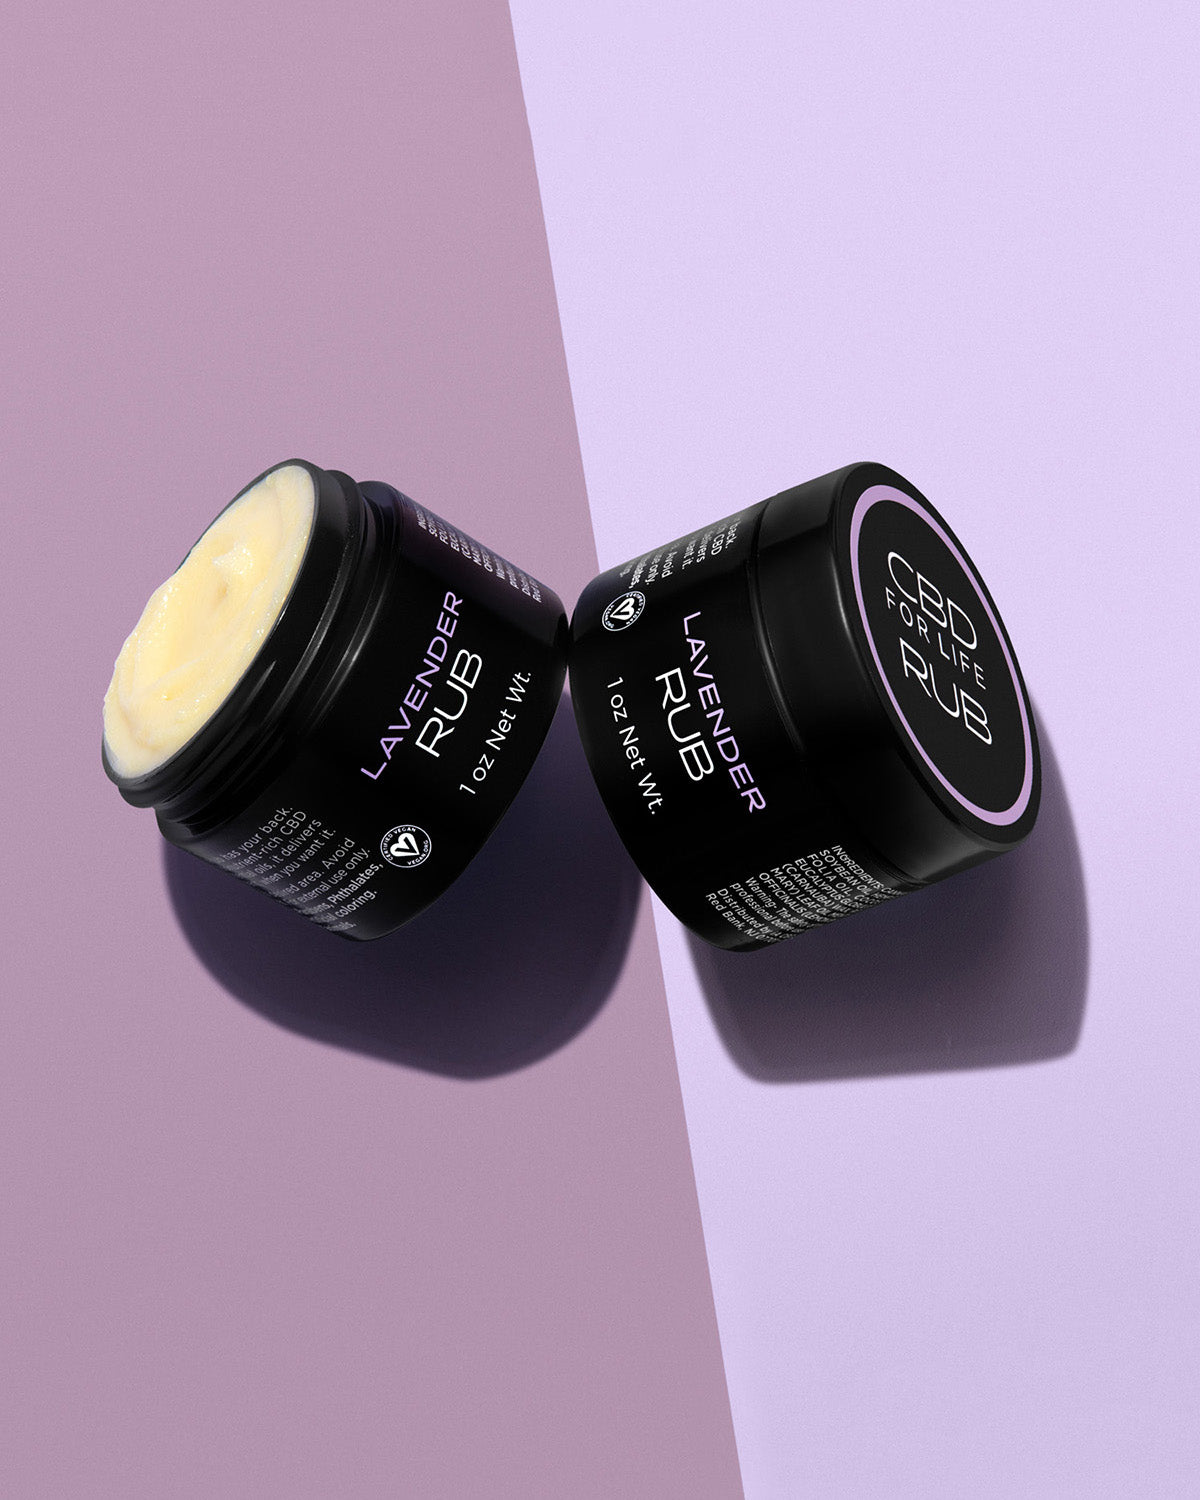 Our list of lavender CBD salve benefits is endless. This CBD relief salve provides target relief for discomfort while nourishing your skin and setting the tone for a better night's rest. 